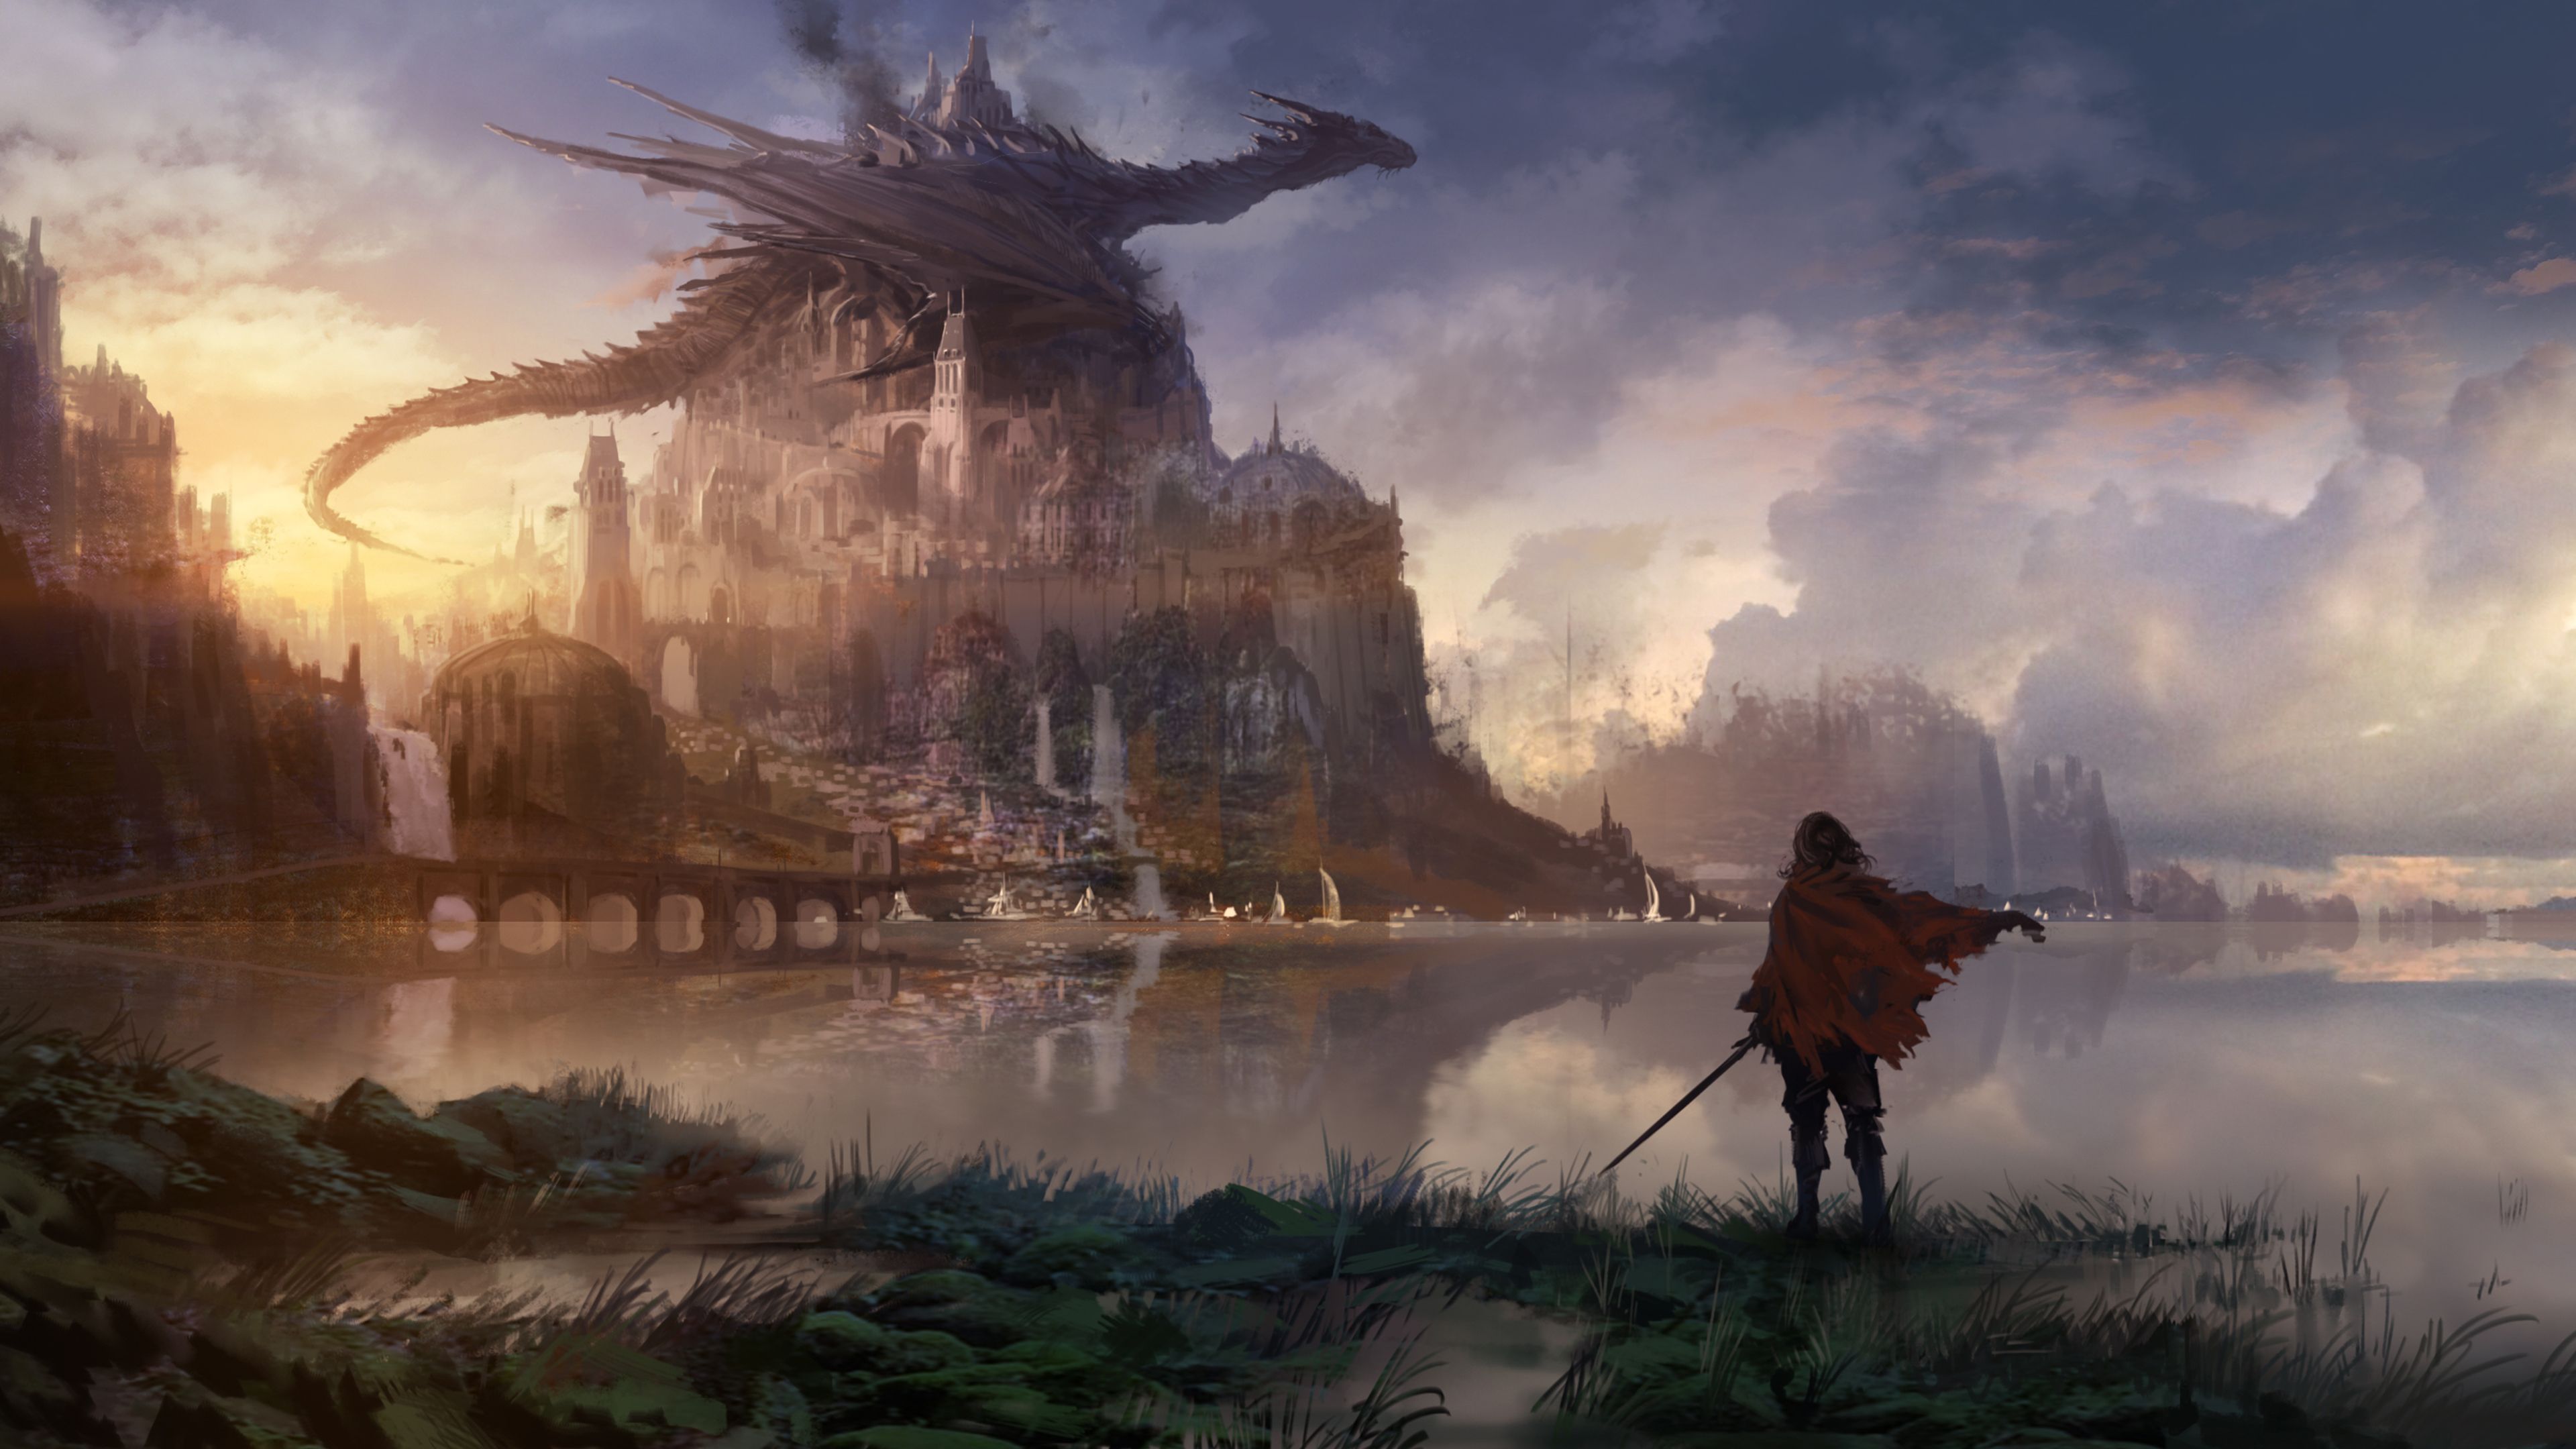 Top 165+ anime fantasy backgrounds best - awesomeenglish.edu.vn